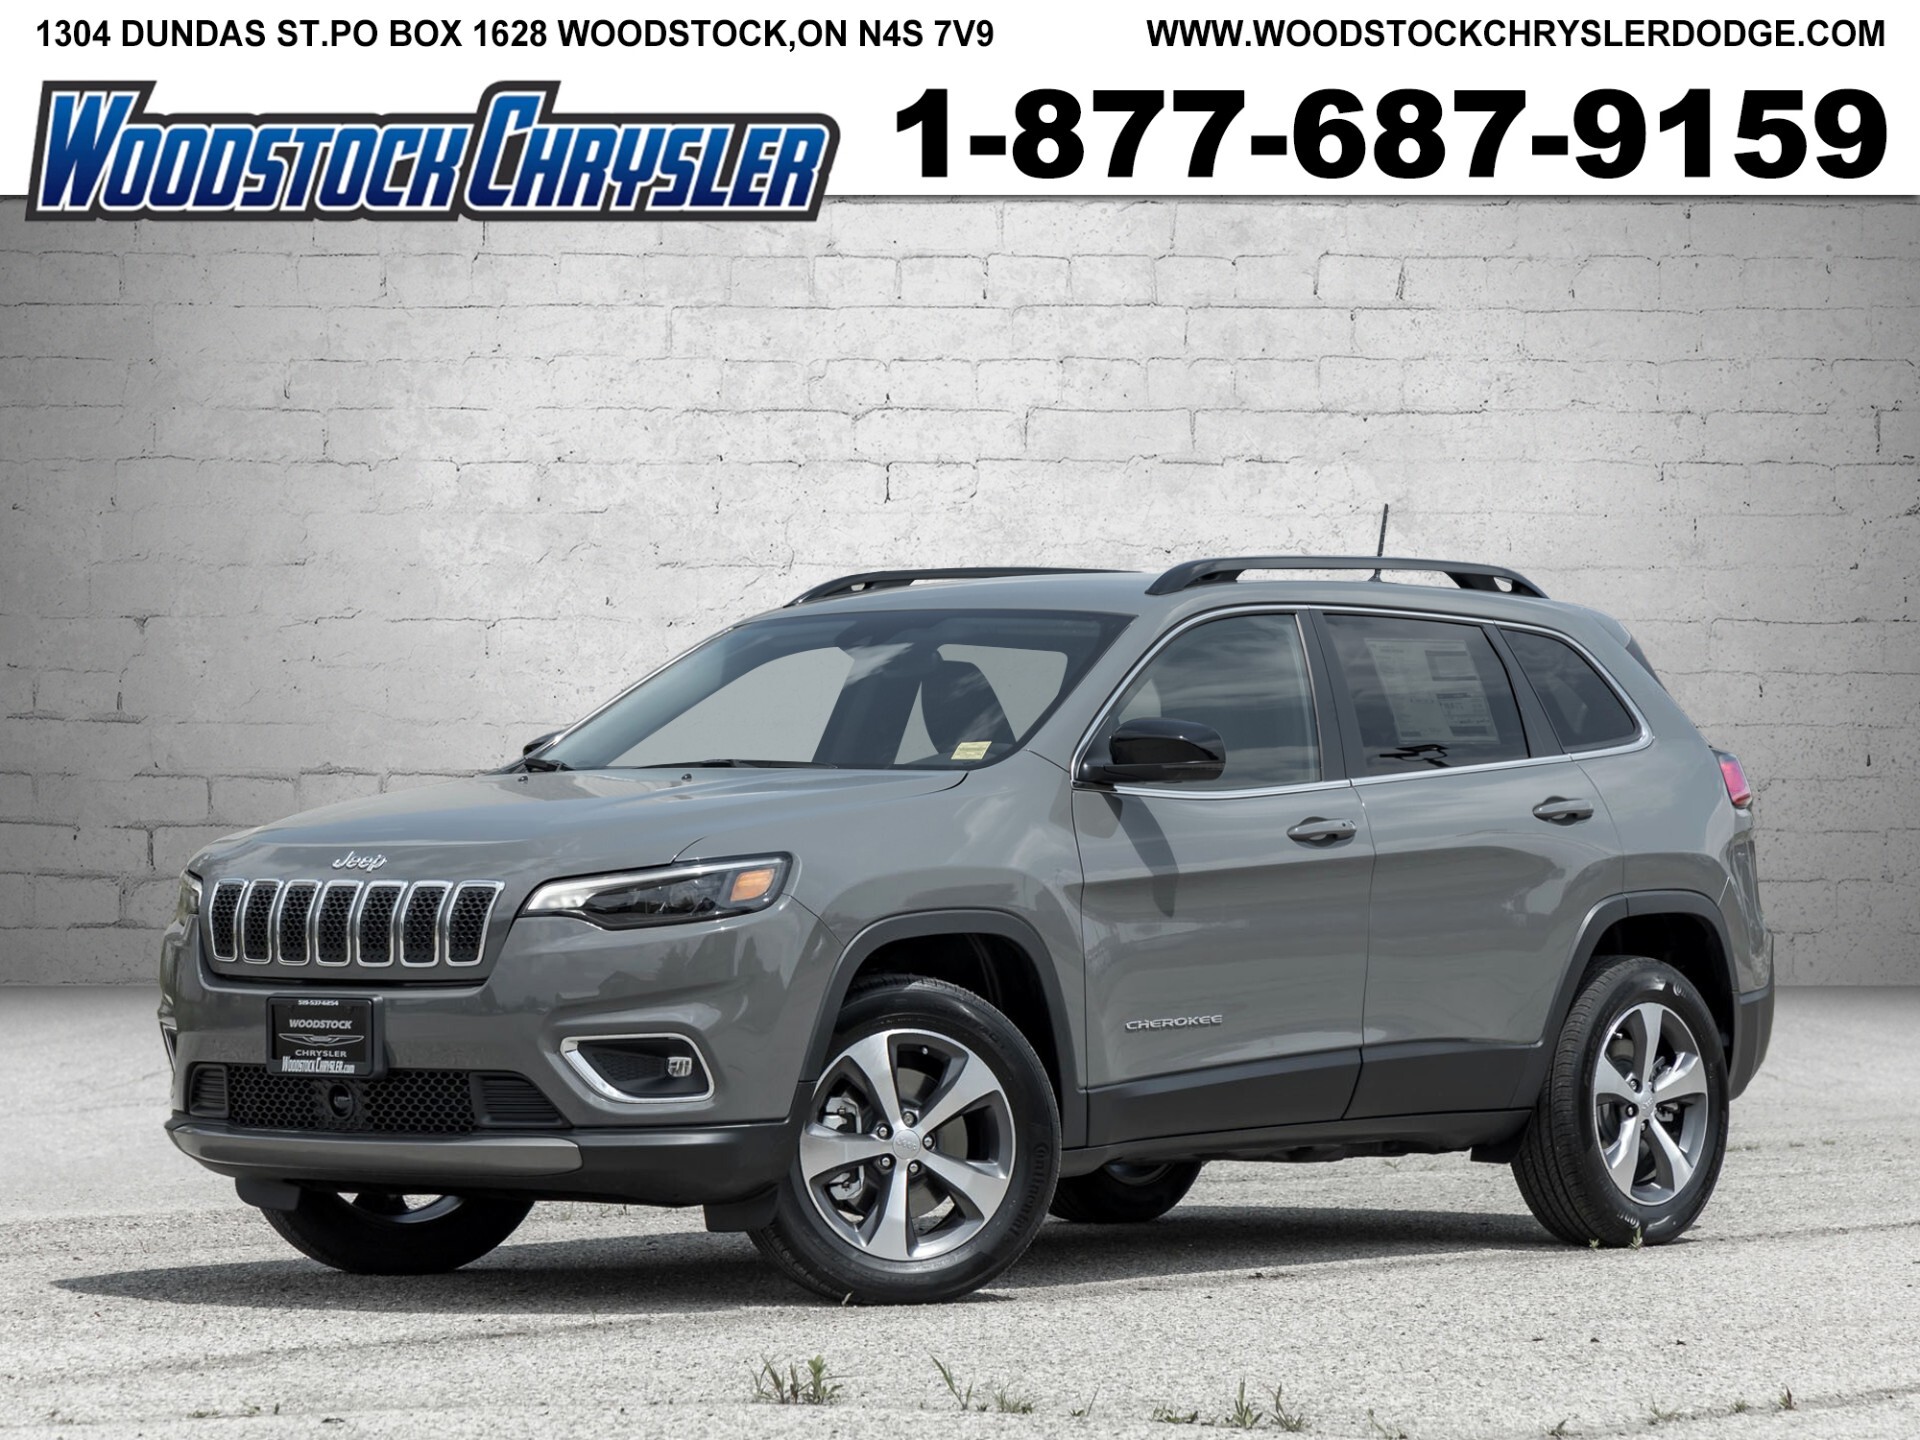 2022 Jeep Cherokee LIMITED | 4X4 | V6 | LEATHER | 8.4" TOUCHSCREEN